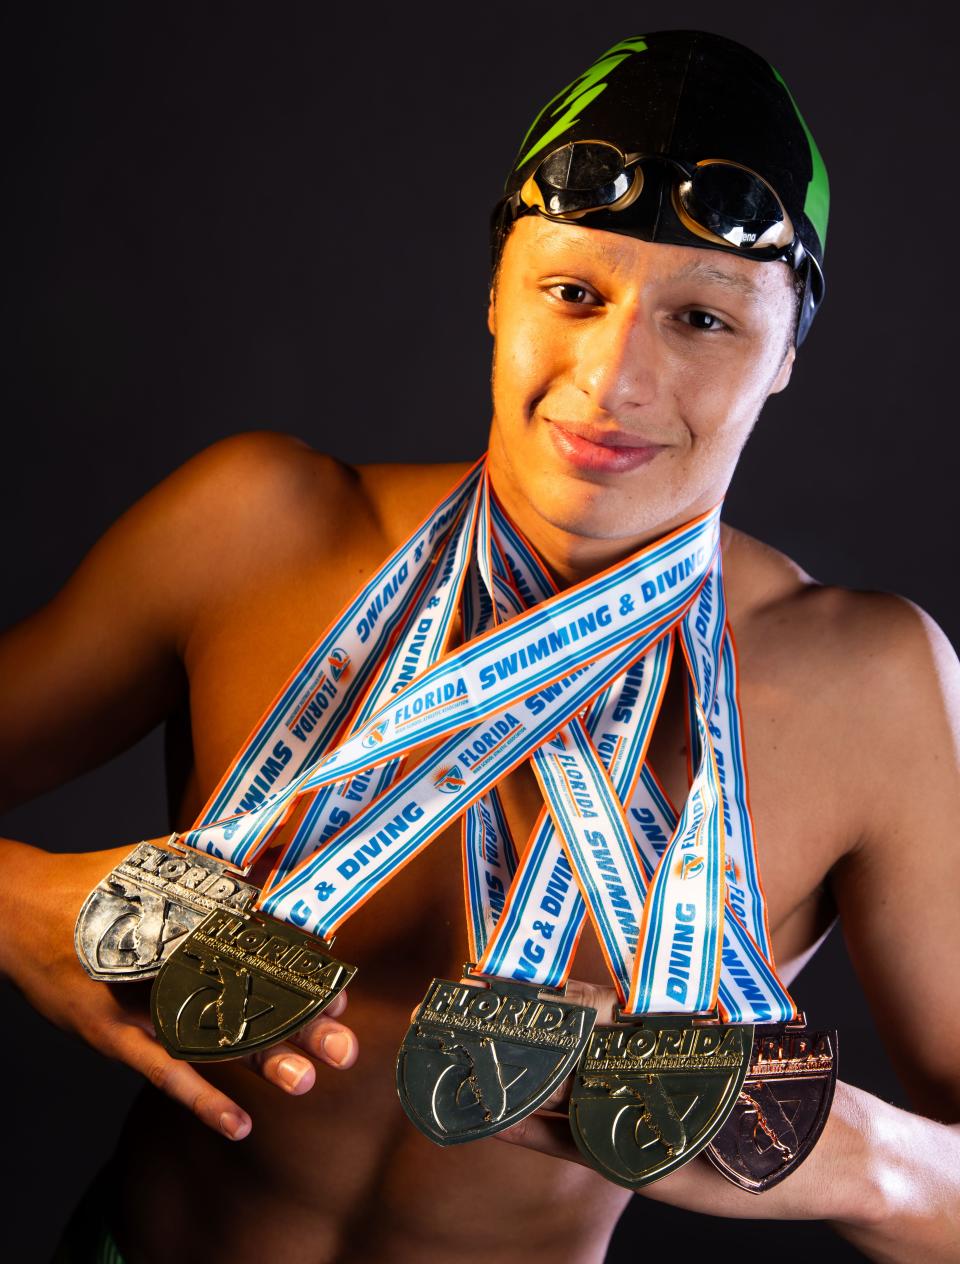 Eastside Ram swimmer Liam Aleman is this years Gainesville Sun Boys All Area Swimmer of the year. Aleman, a senior, was photographed at the Gainesville Sun studio Tuesday January 9, 2024. He took three gold, one silver and one bronze medals in the FHSAA 2023 Swimming & Diving State Championships in Class 2A. He took gold in the 200 IM, 100 Breast and 200 madly relay. He took silver for team and bronze for the 400 freestyle relay. [Doug Engle/Ocala Star Banner]2024